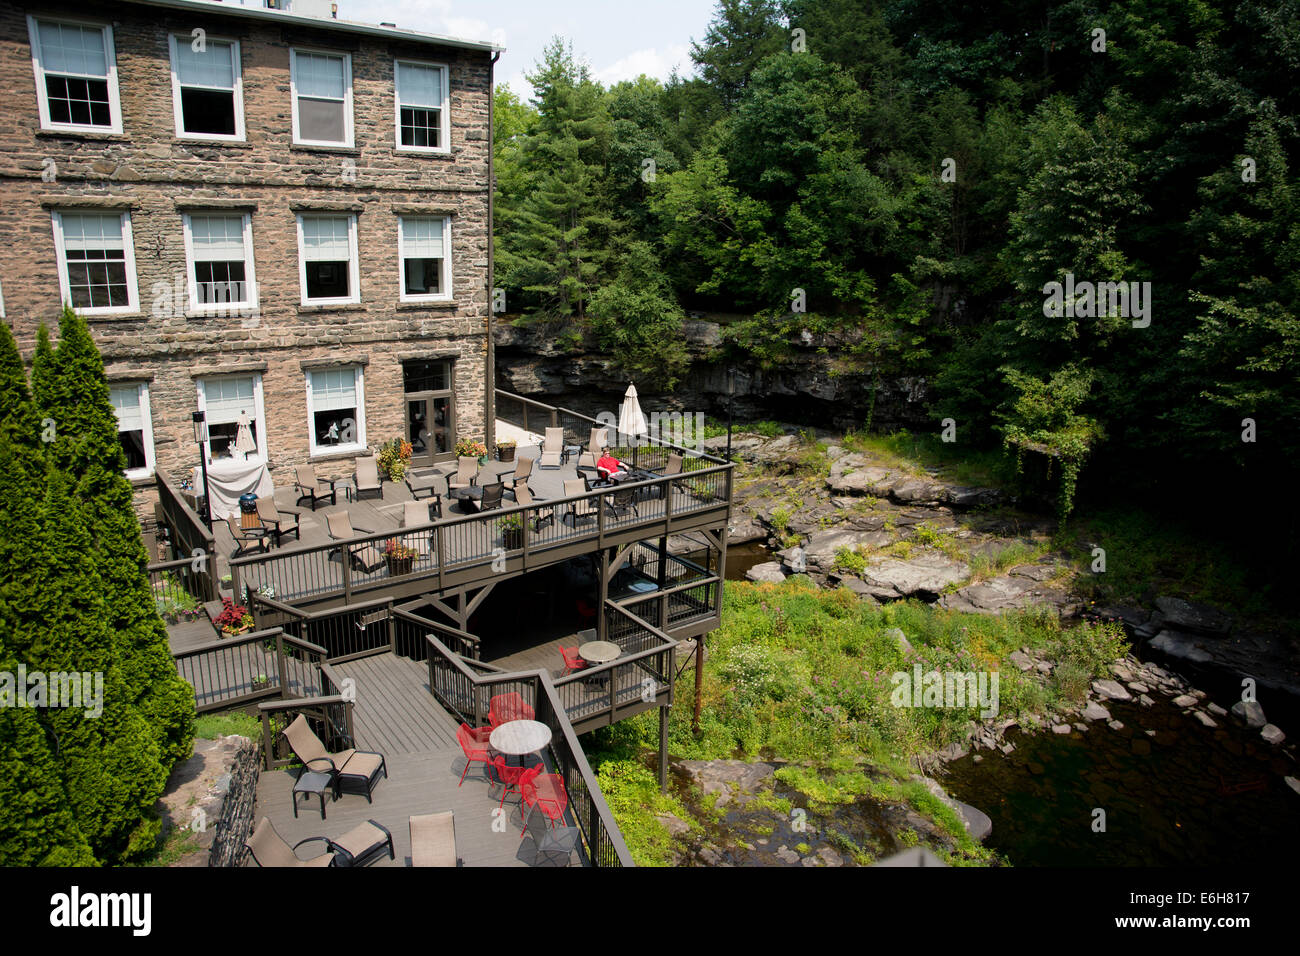 The Ledges Hotel in the Poconos, Hawley, Pennsylvania, is a luxury historic hotel built on the Paupack High Water Falls. Stock Photo